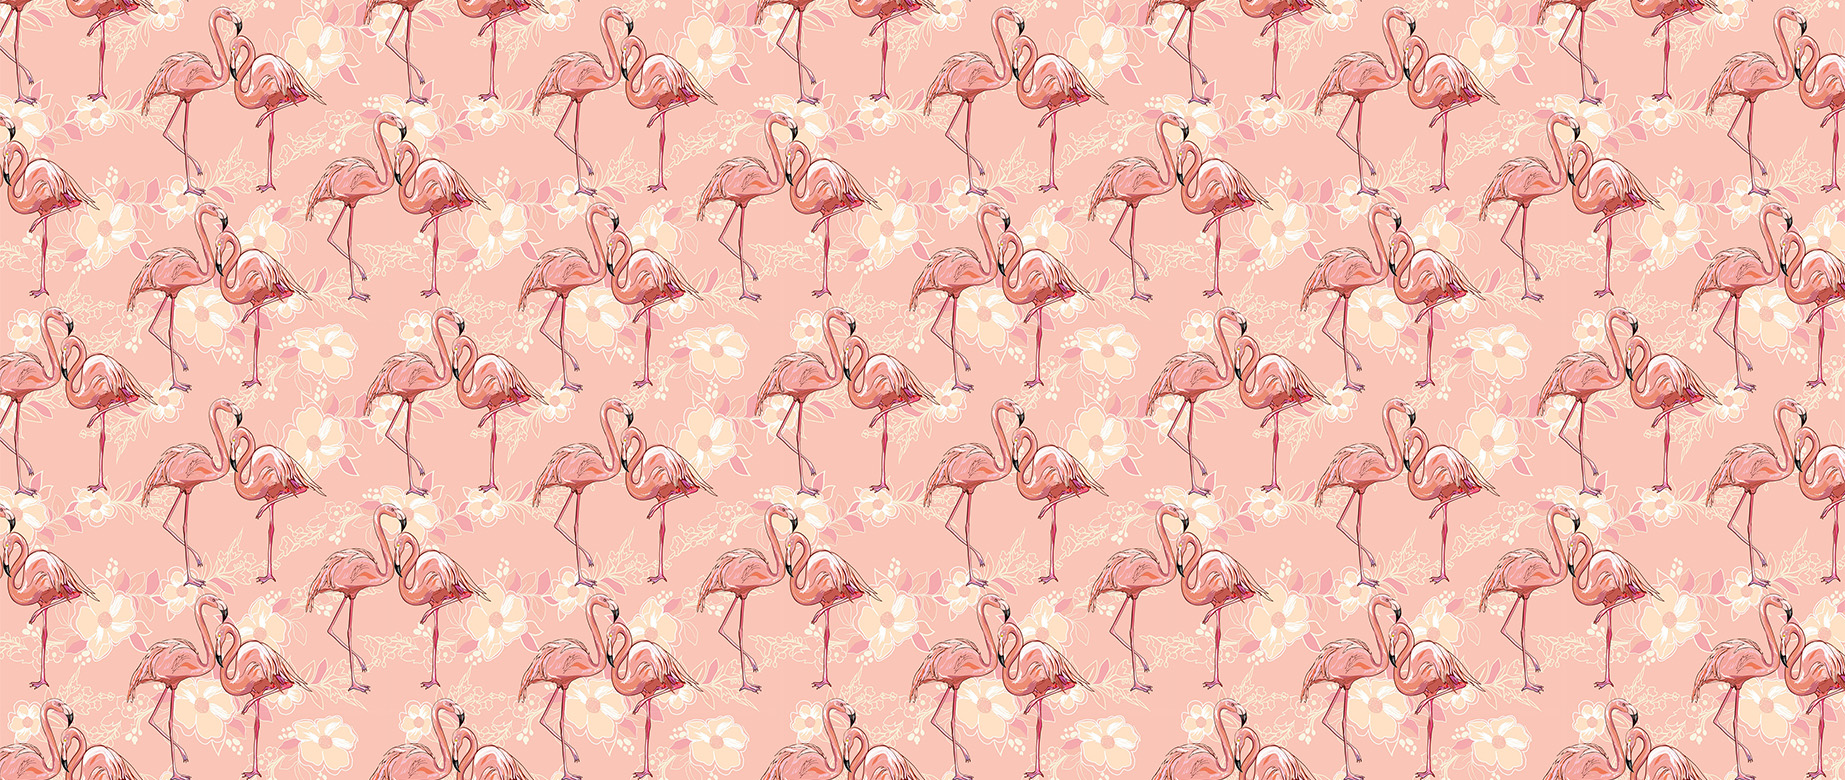 orange-flamingos-with-flowers-wallpapers-full-wide-view